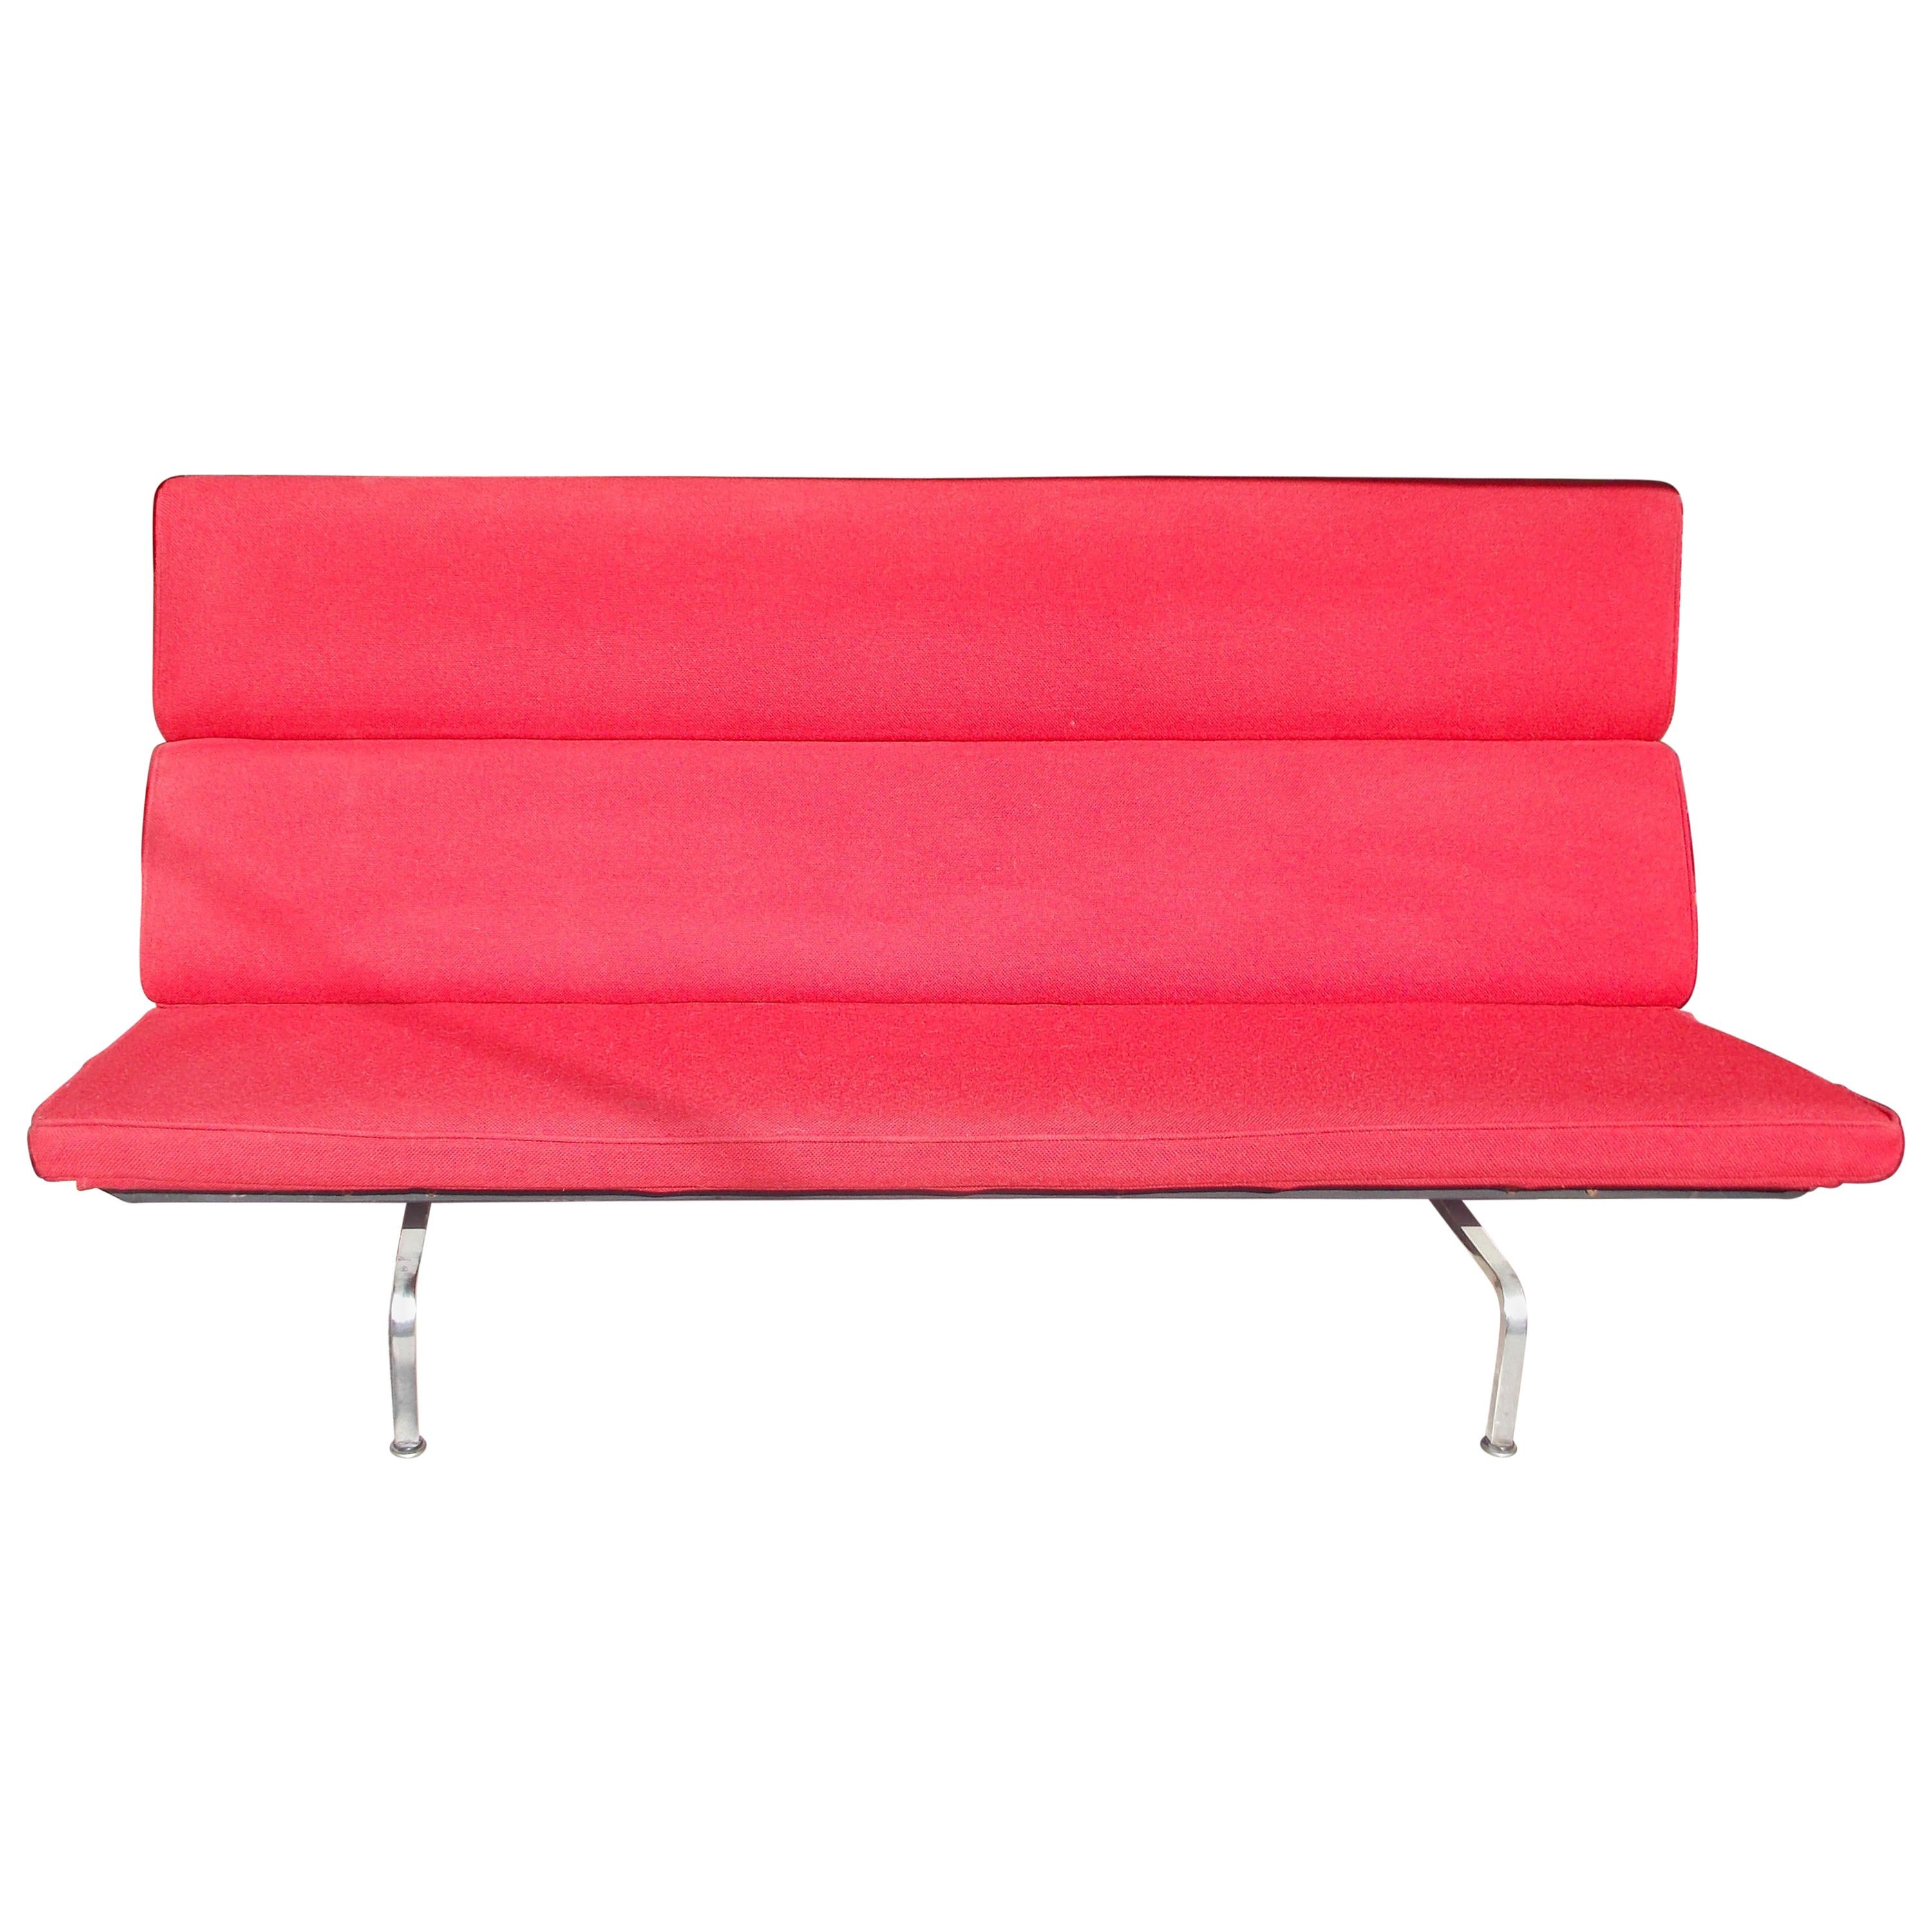 Charles and Ray Eames Sofa Compact For Sale at 1stDibs